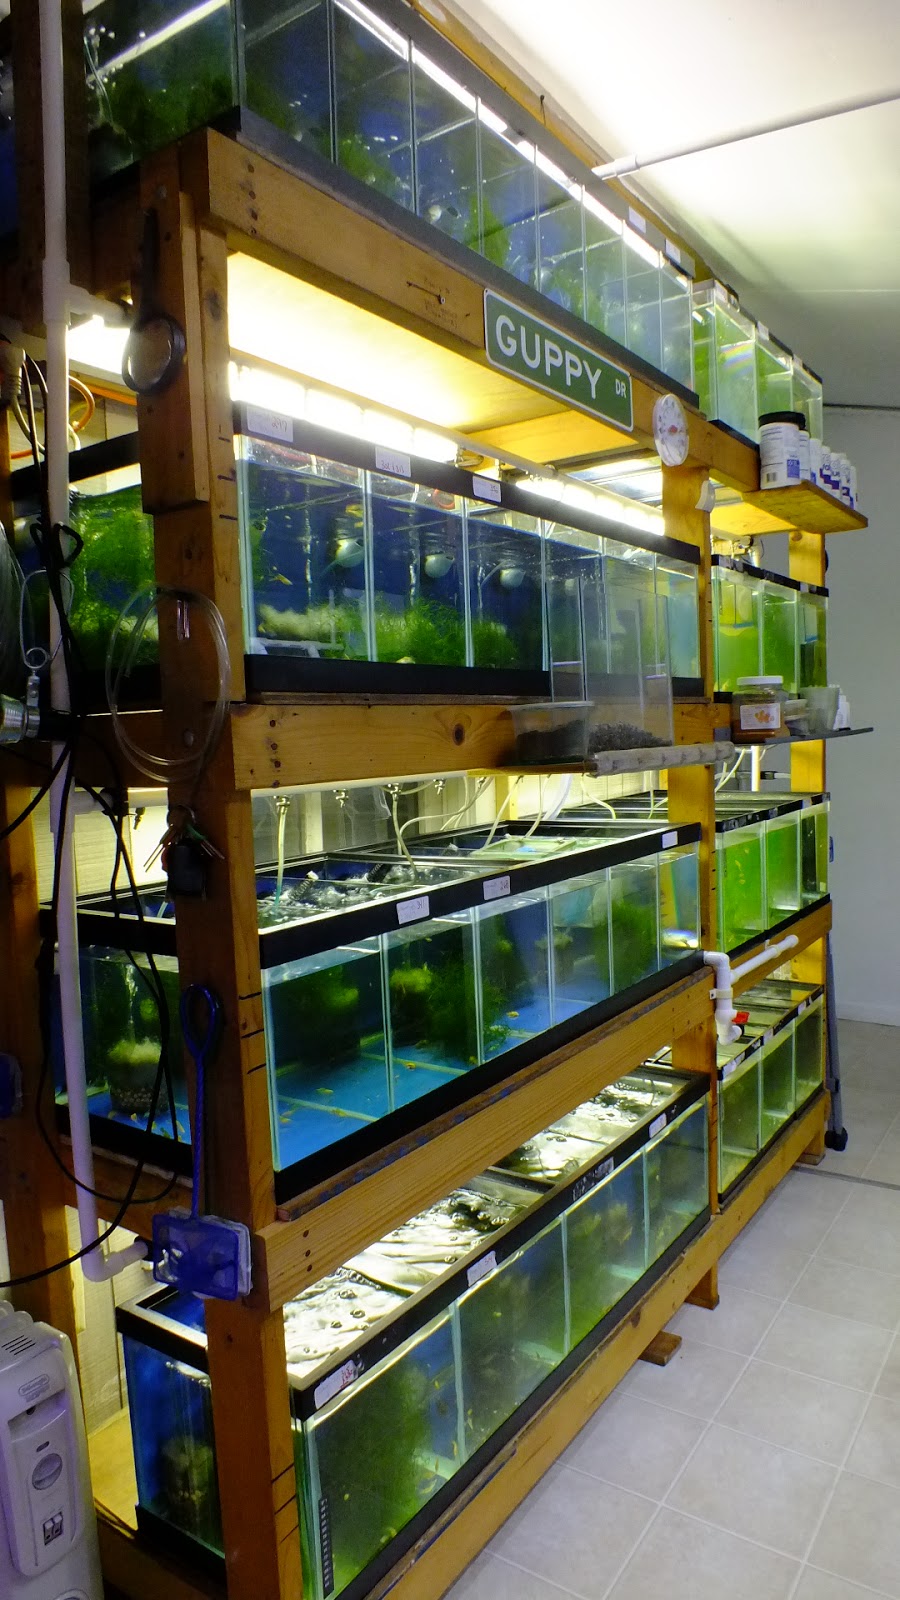 swordtail guppies: breeding rack systems; automation for